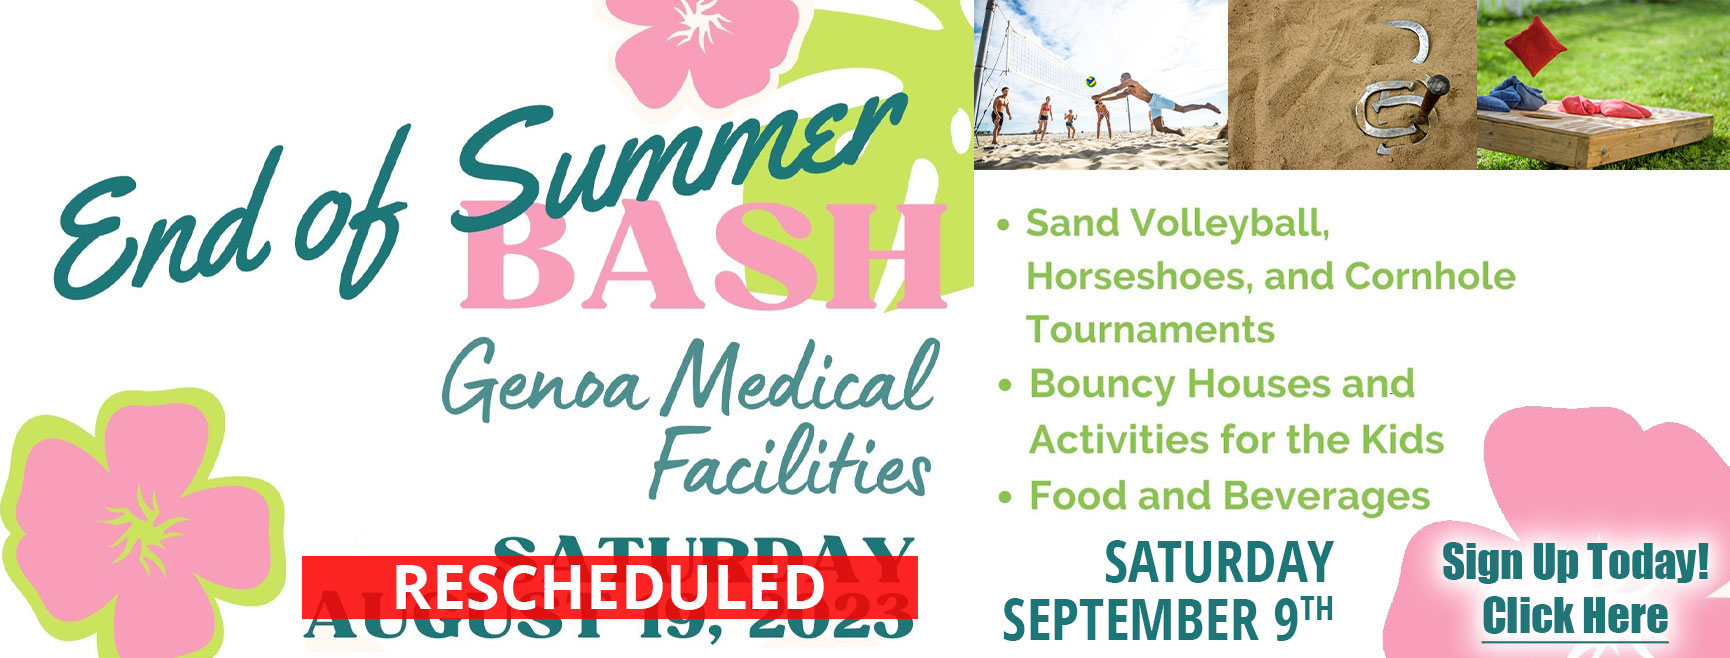 End of Summer Bash

Genoa Medical Facilities 
Save the Date
August 19, 2023
Sand Volleyball, Horseshoes,
& Cornhole Tournaments
Bouncy Houses & Activities
for the kids
Food & Beverages